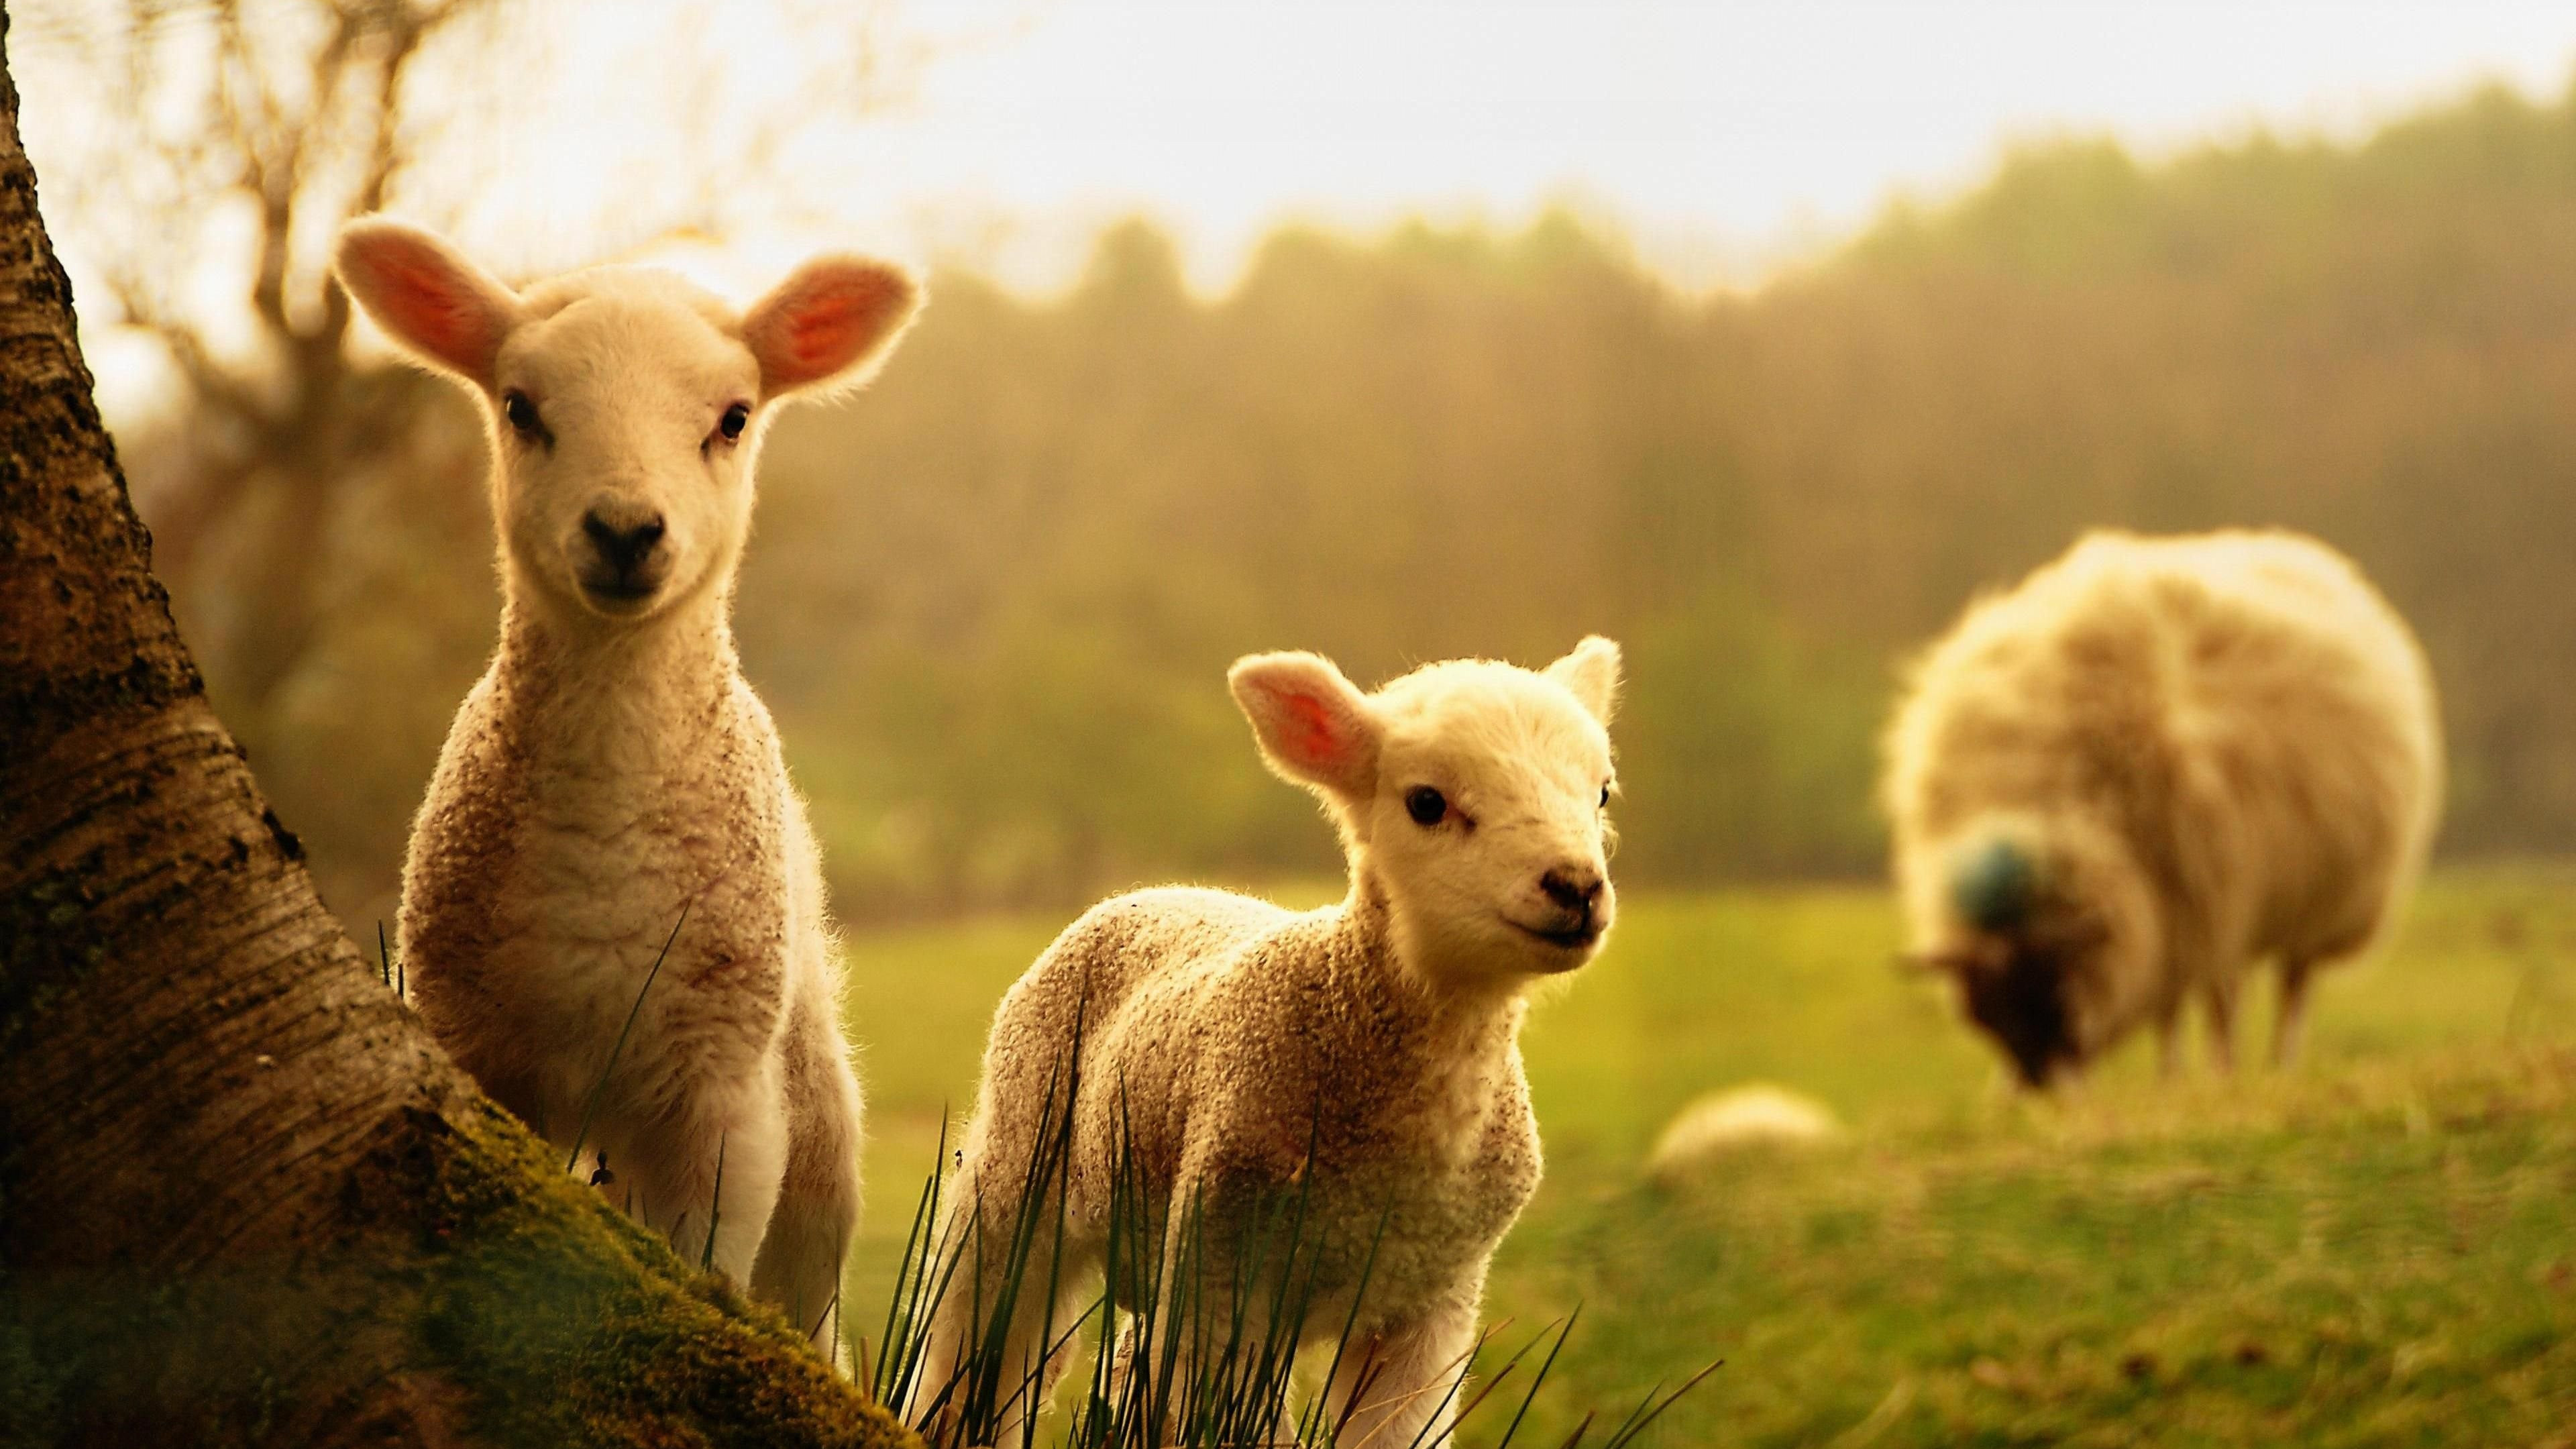 Full HD sheep wallpapers, High-quality images, Perfect for desktop background, Beautiful visual experience, 3840x2160 4K Desktop